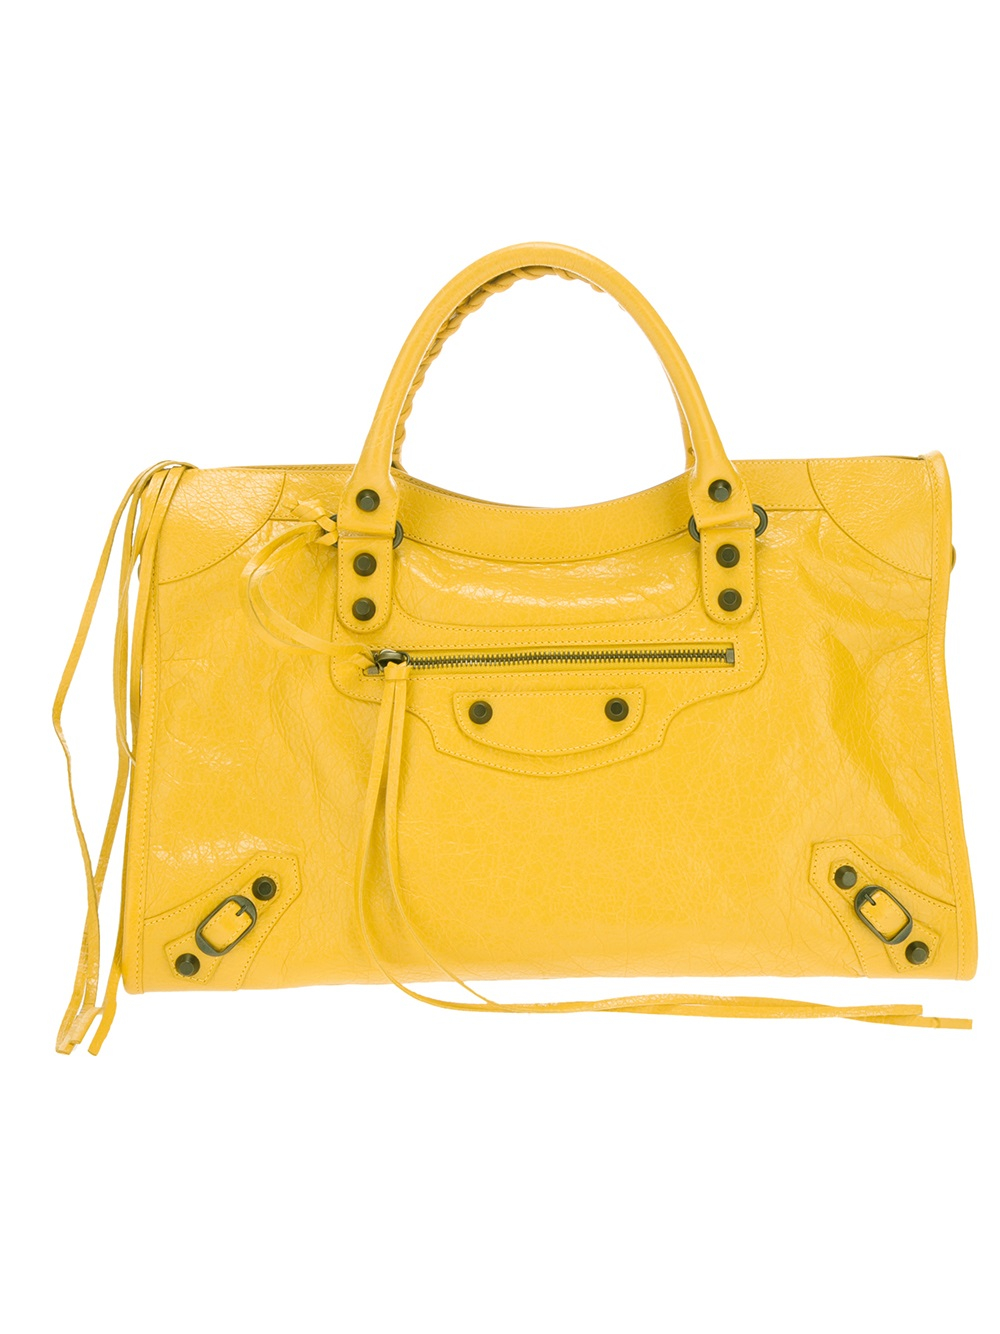 Lyst - Balenciaga Giant City Tote in Yellow